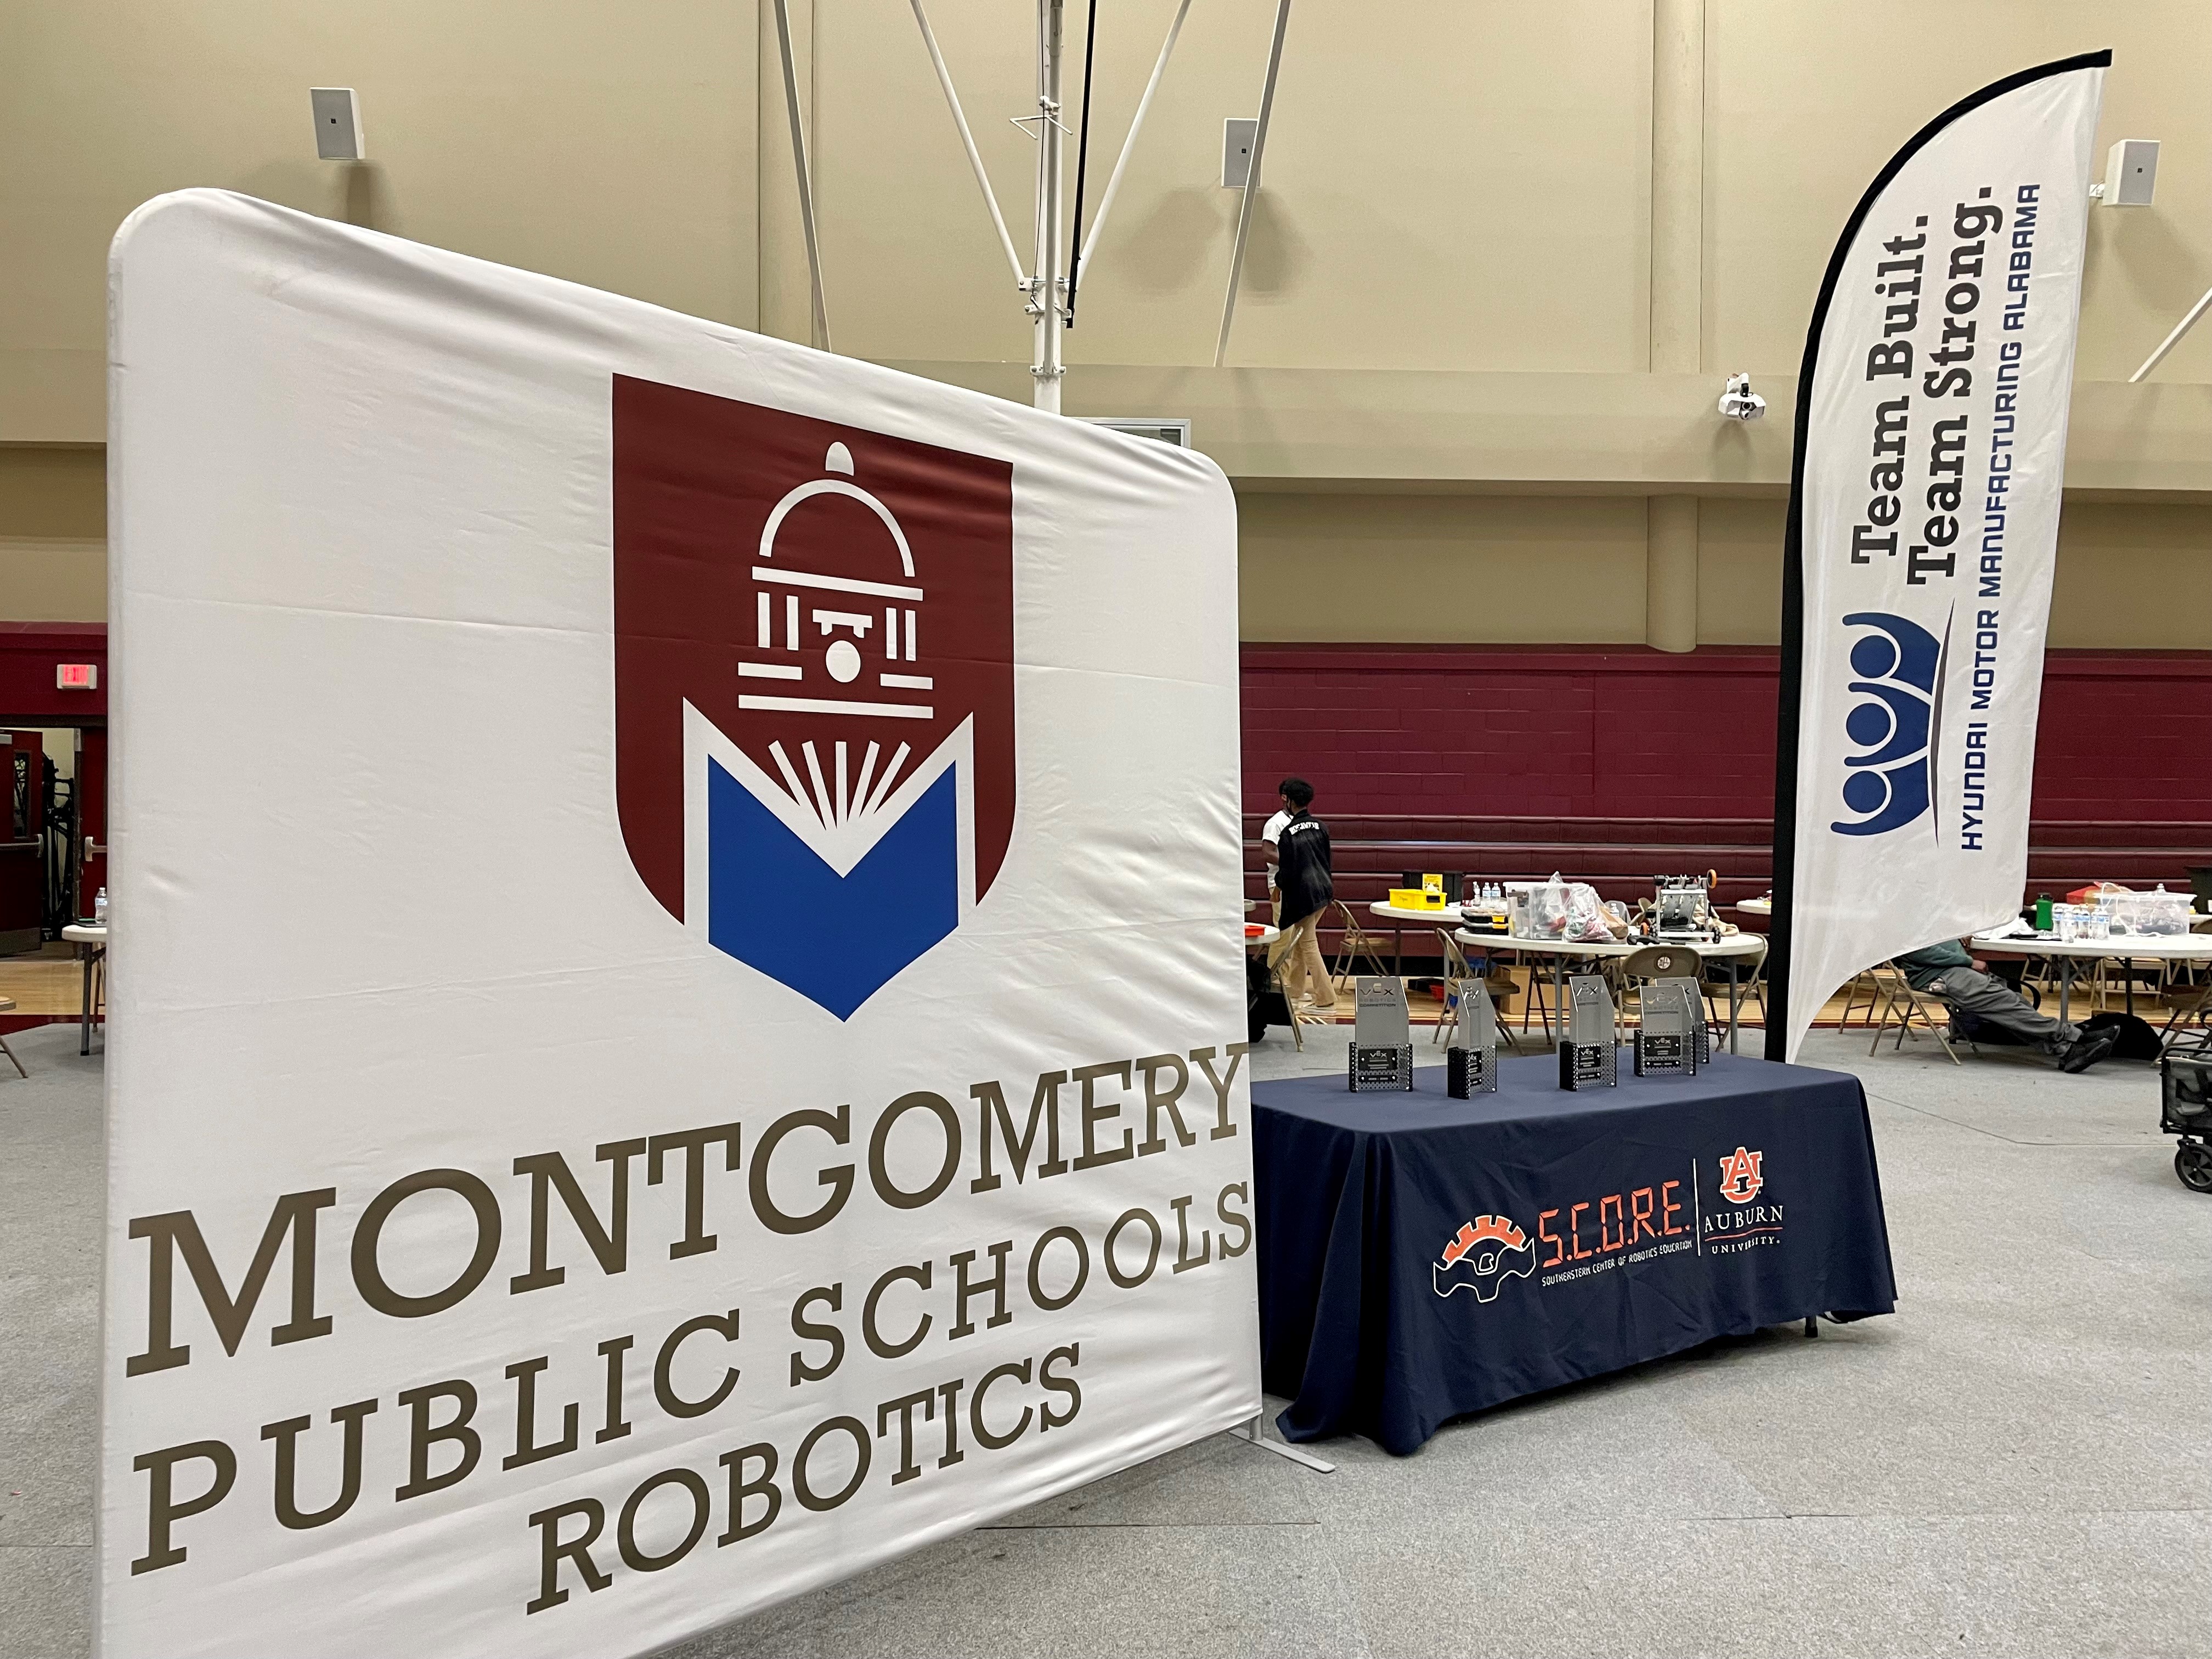 The partnership between Hyundai Motor Manufacturing Alabama (HMMA), the Southeastern Center of Robotics Education (SCORE) and Montgomery Public Schools (MPS) formed the HIRE initiative that will impact more than 200 students and 34 teachers annually.